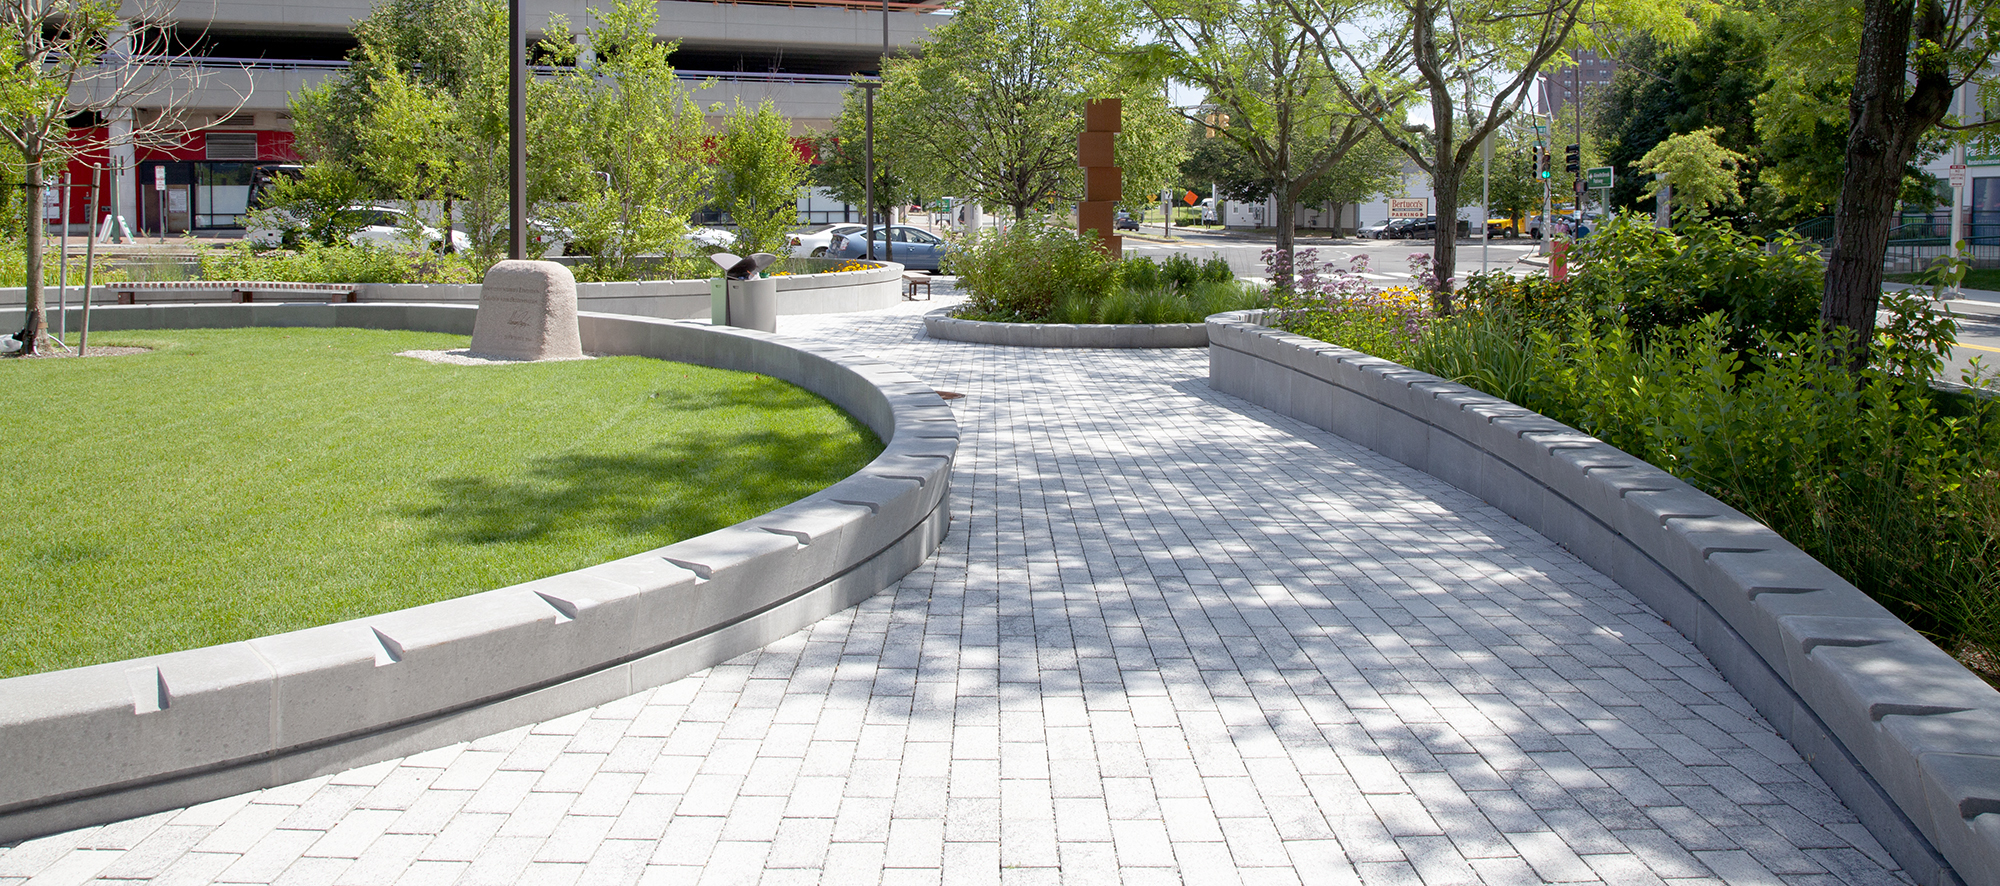 Unilock Eco-Priora pavers create a curved path bordered by raised gardens with a circular garden and block sculpture at the end.